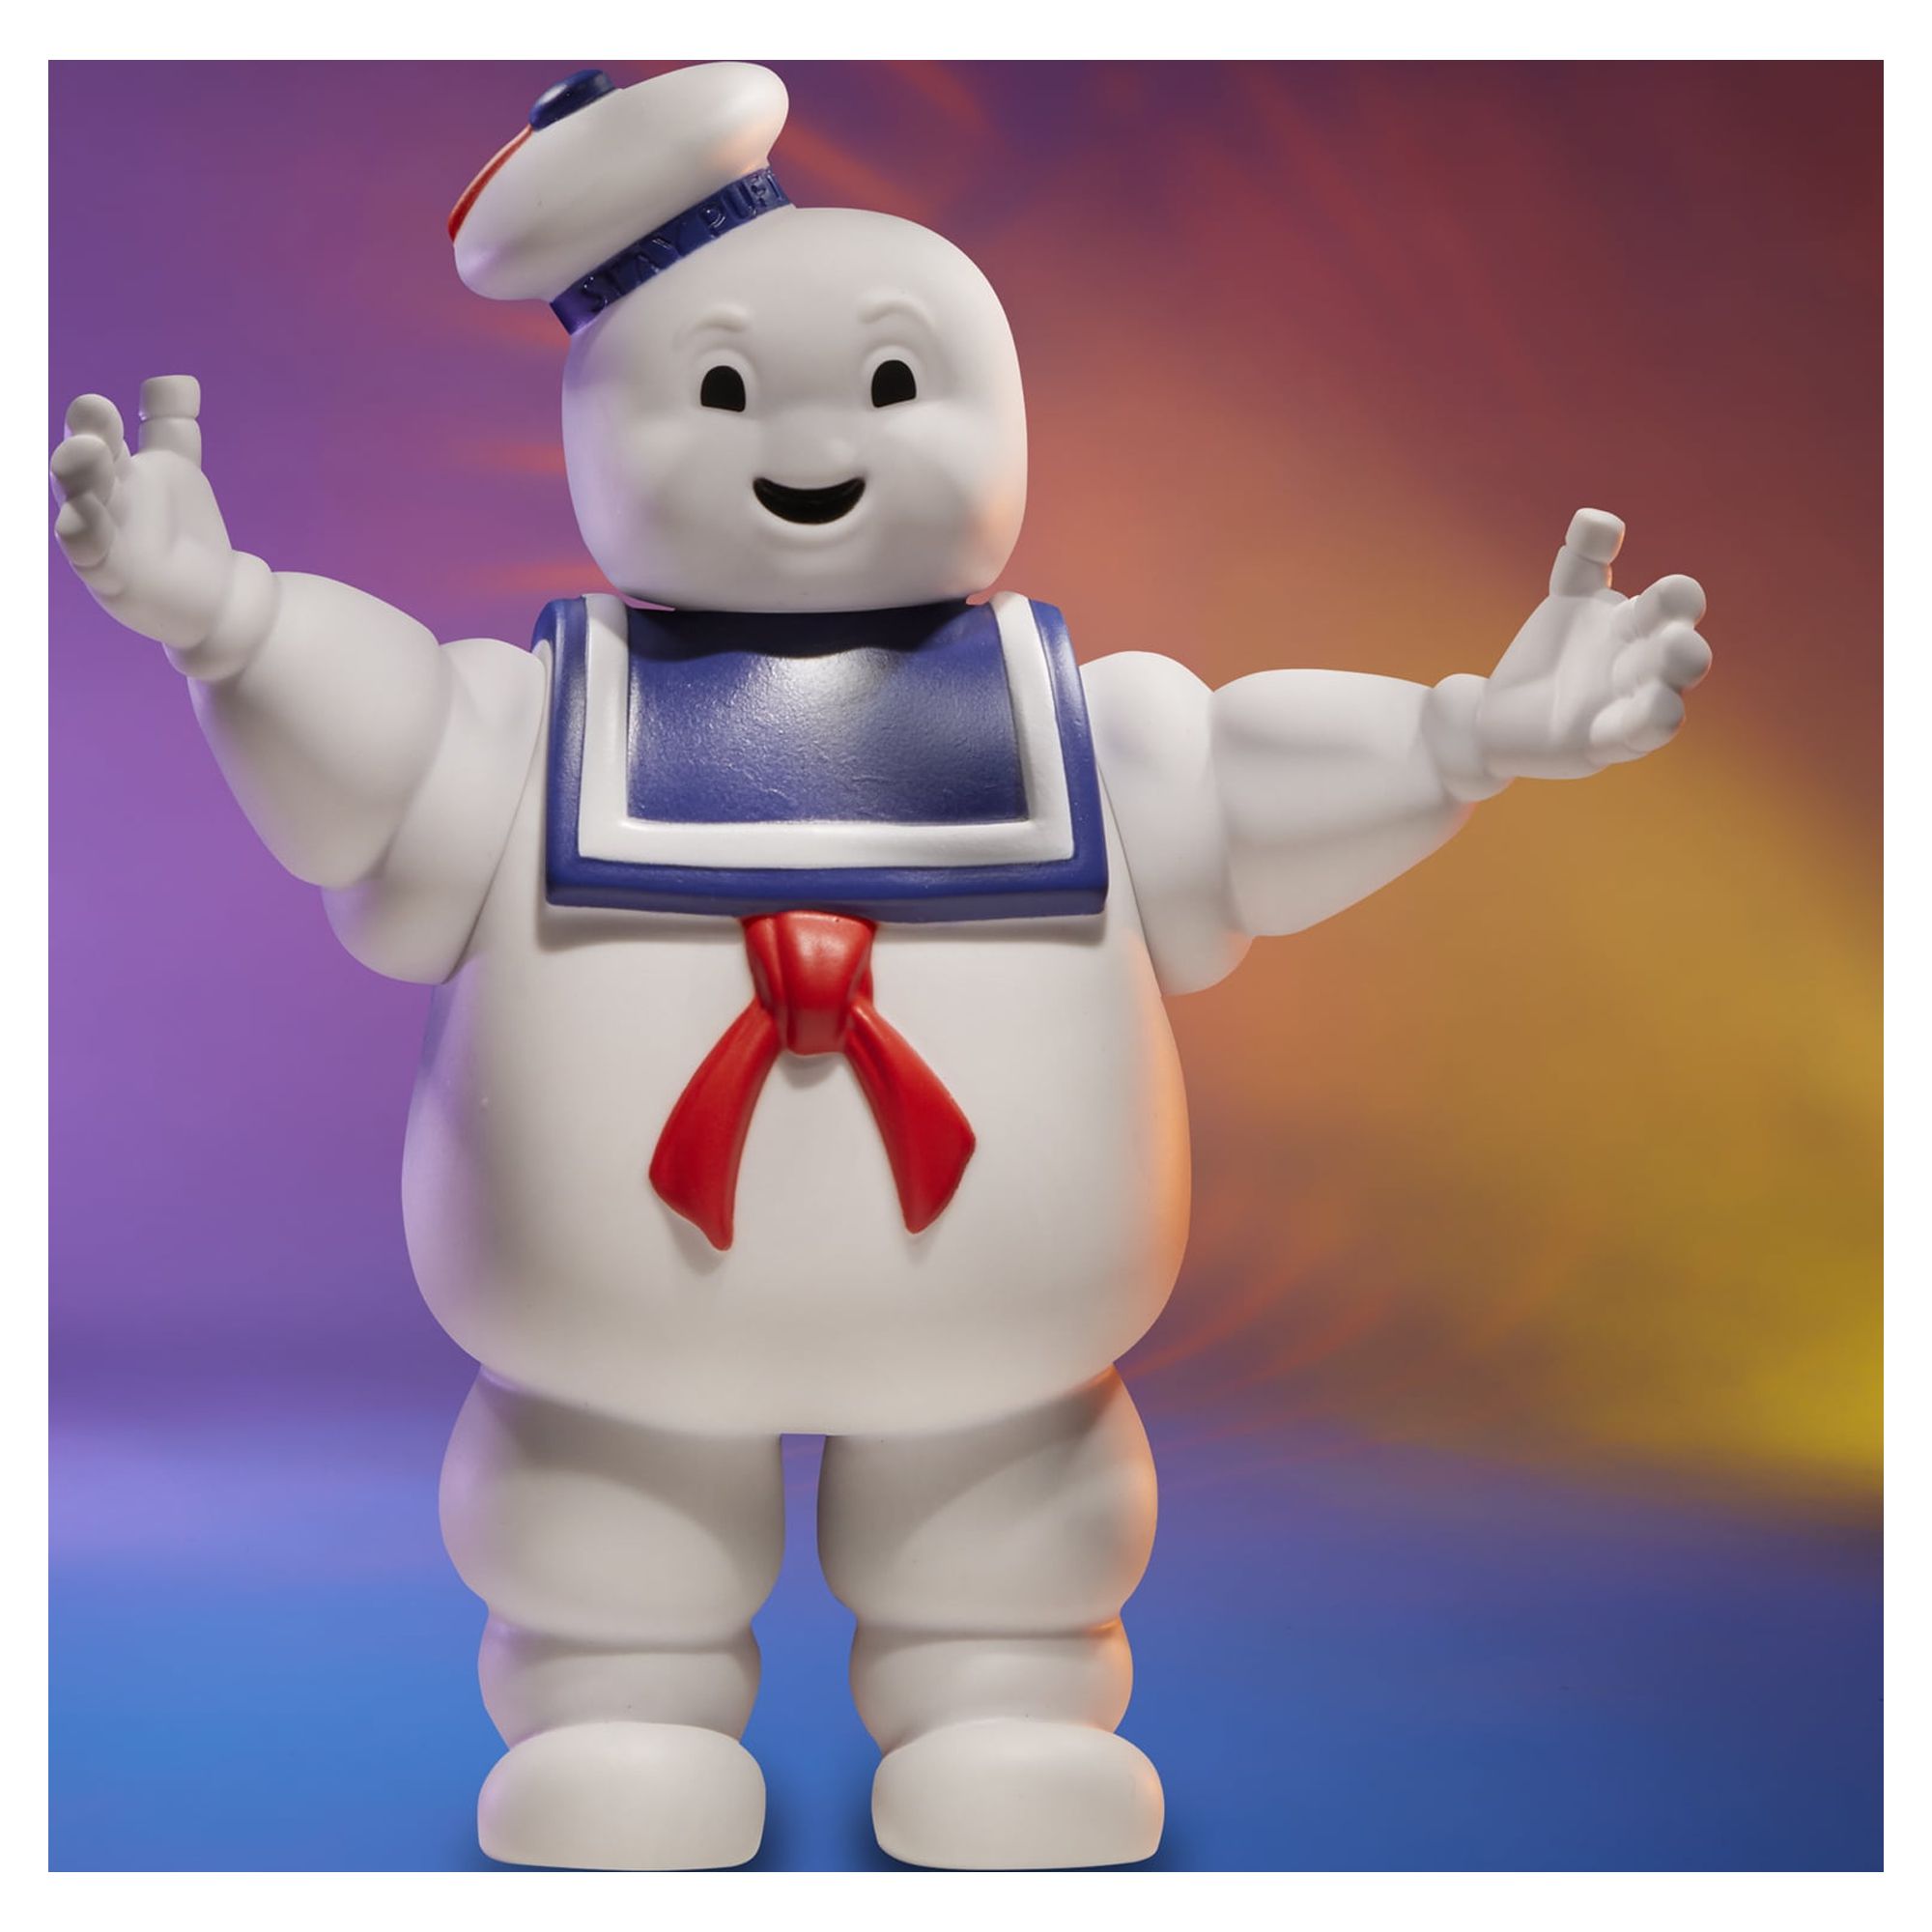 Ghostbusters Kenner Classics Stay-Puft Marshmallow Man - image 4 of 7